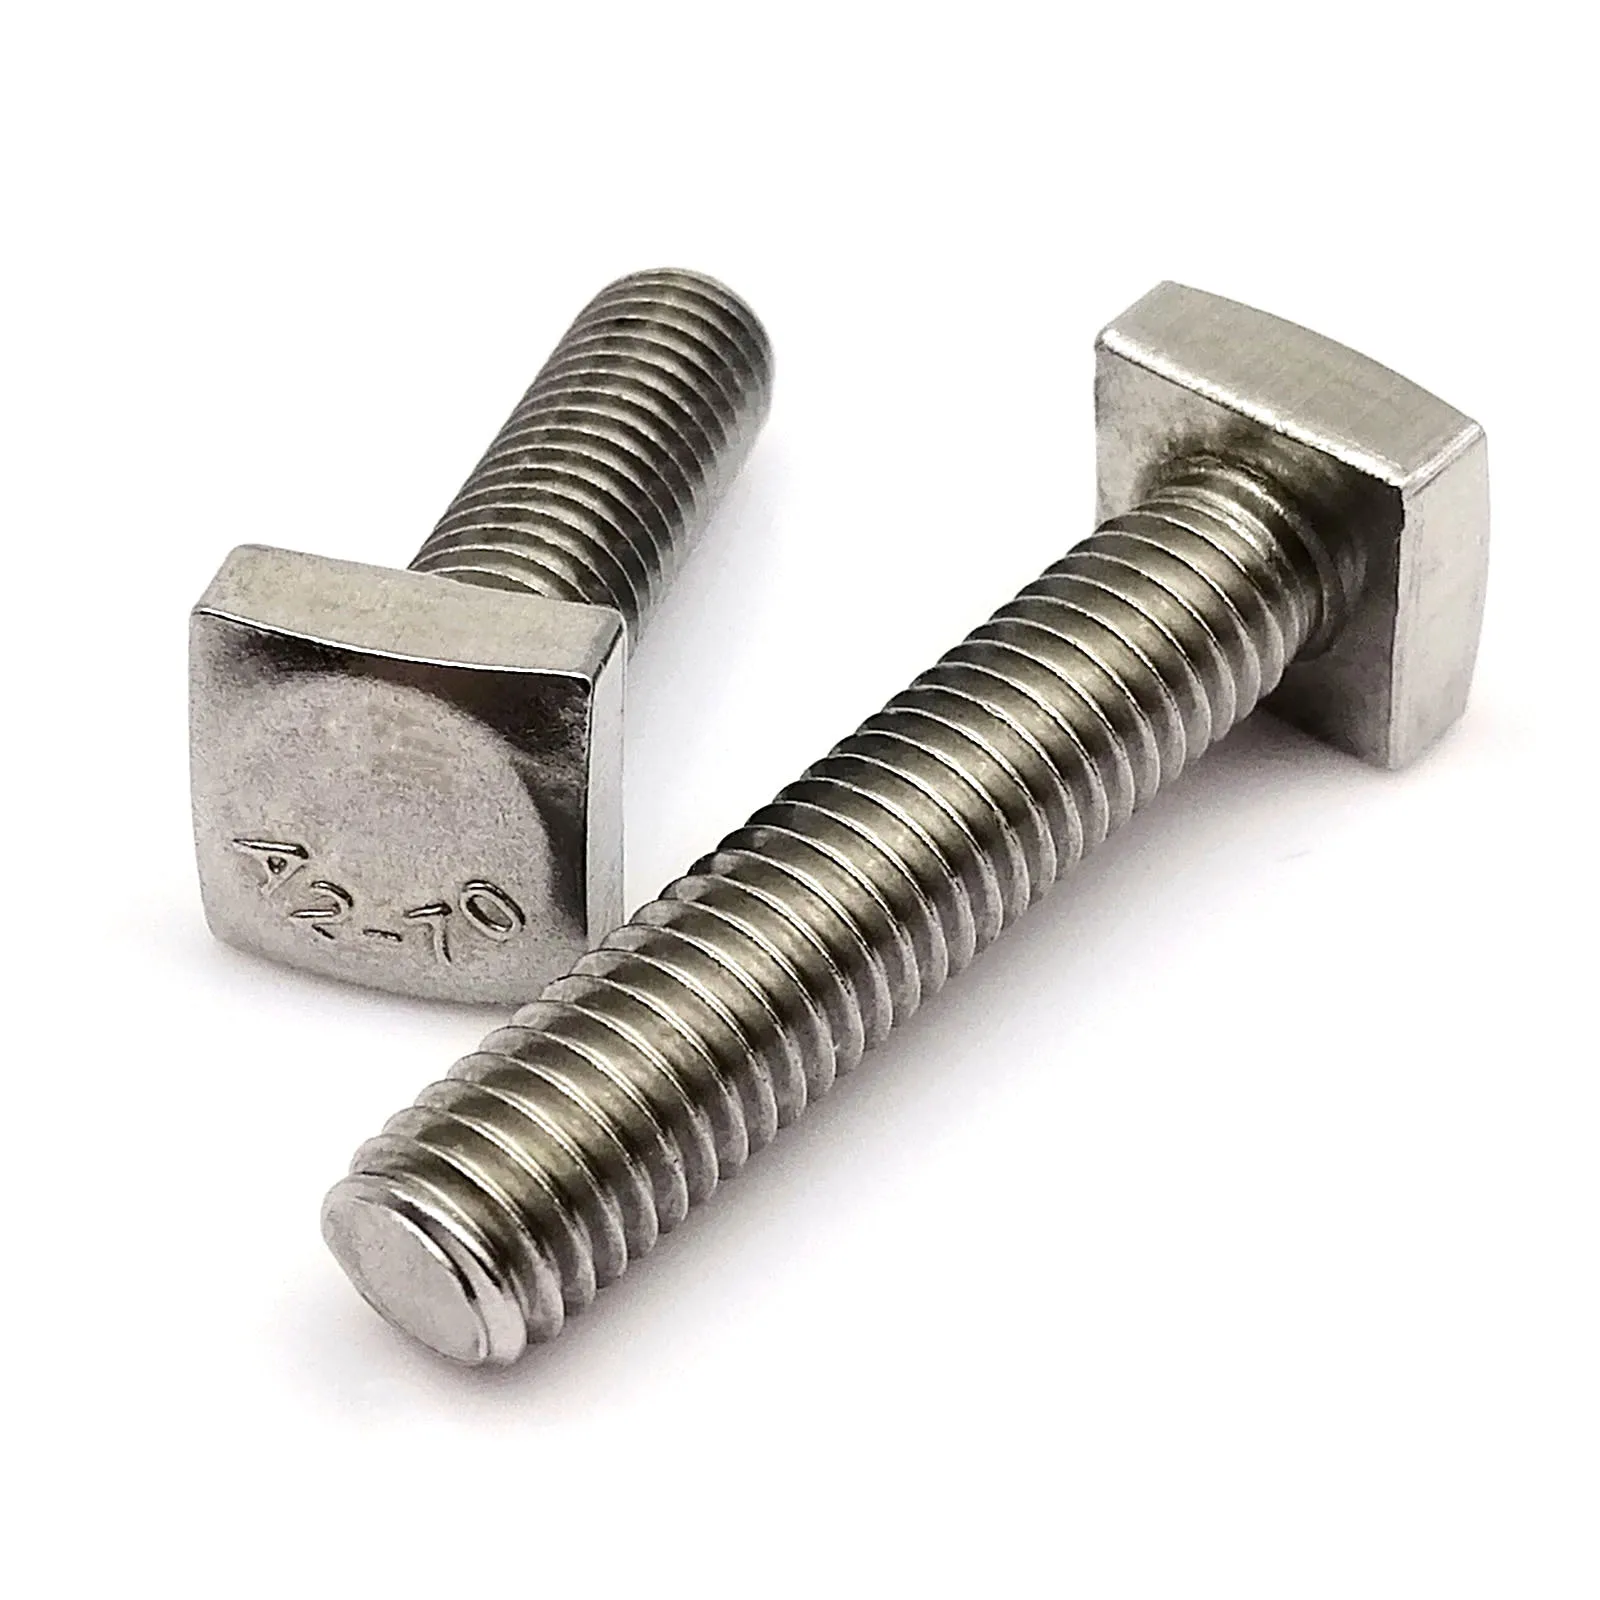 M6 M8 304 Stainless Steel Square Head Bolts With Small Head GB35 